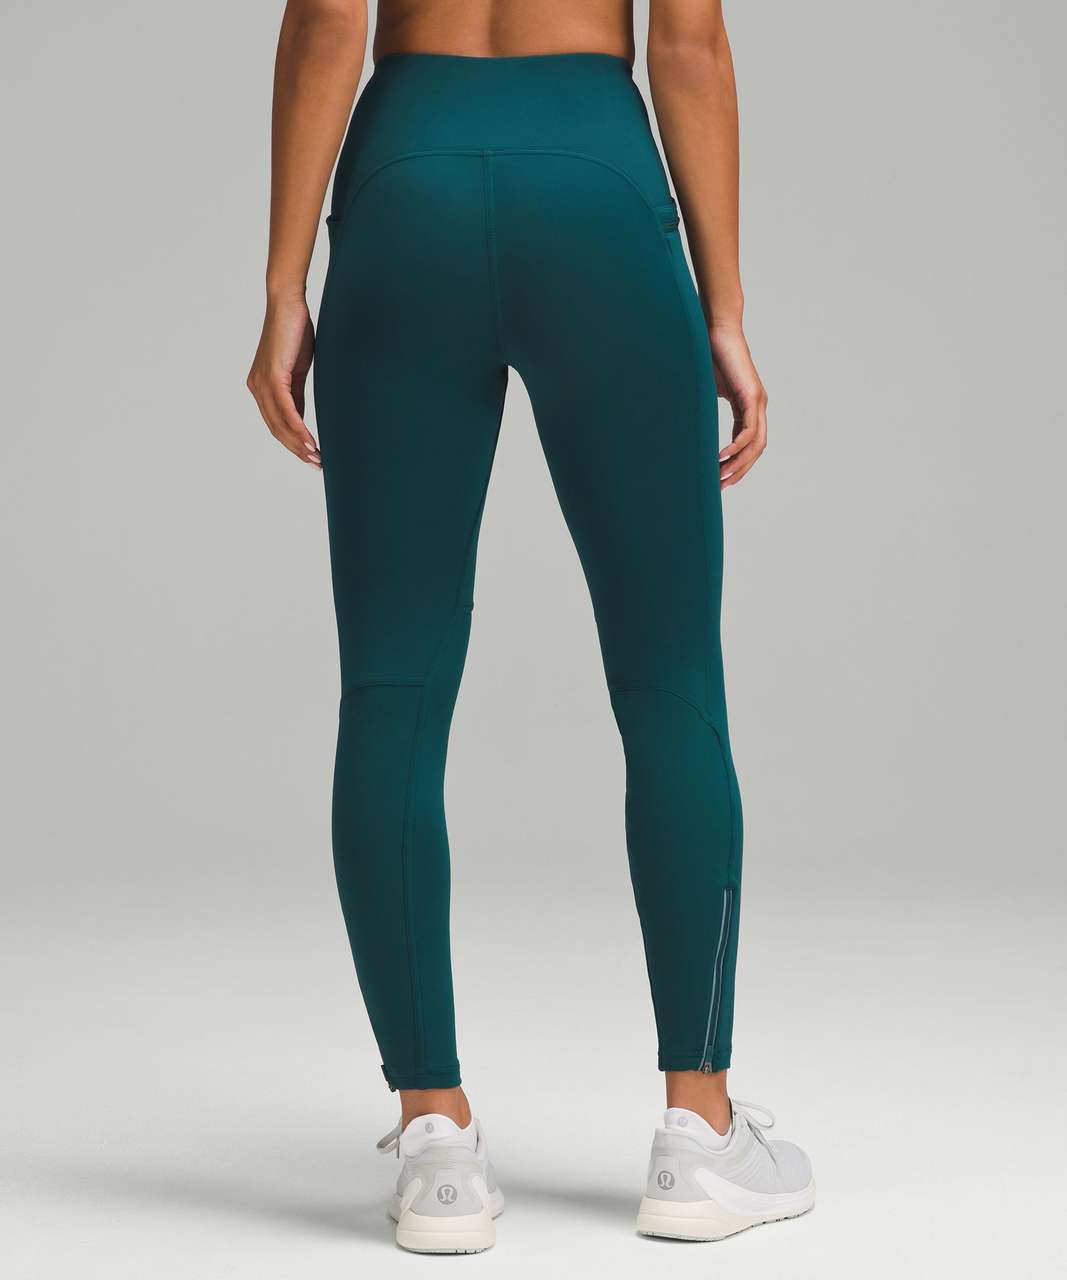 Lululemon Cold Weather High-Rise Running Tight 28" - Storm Teal